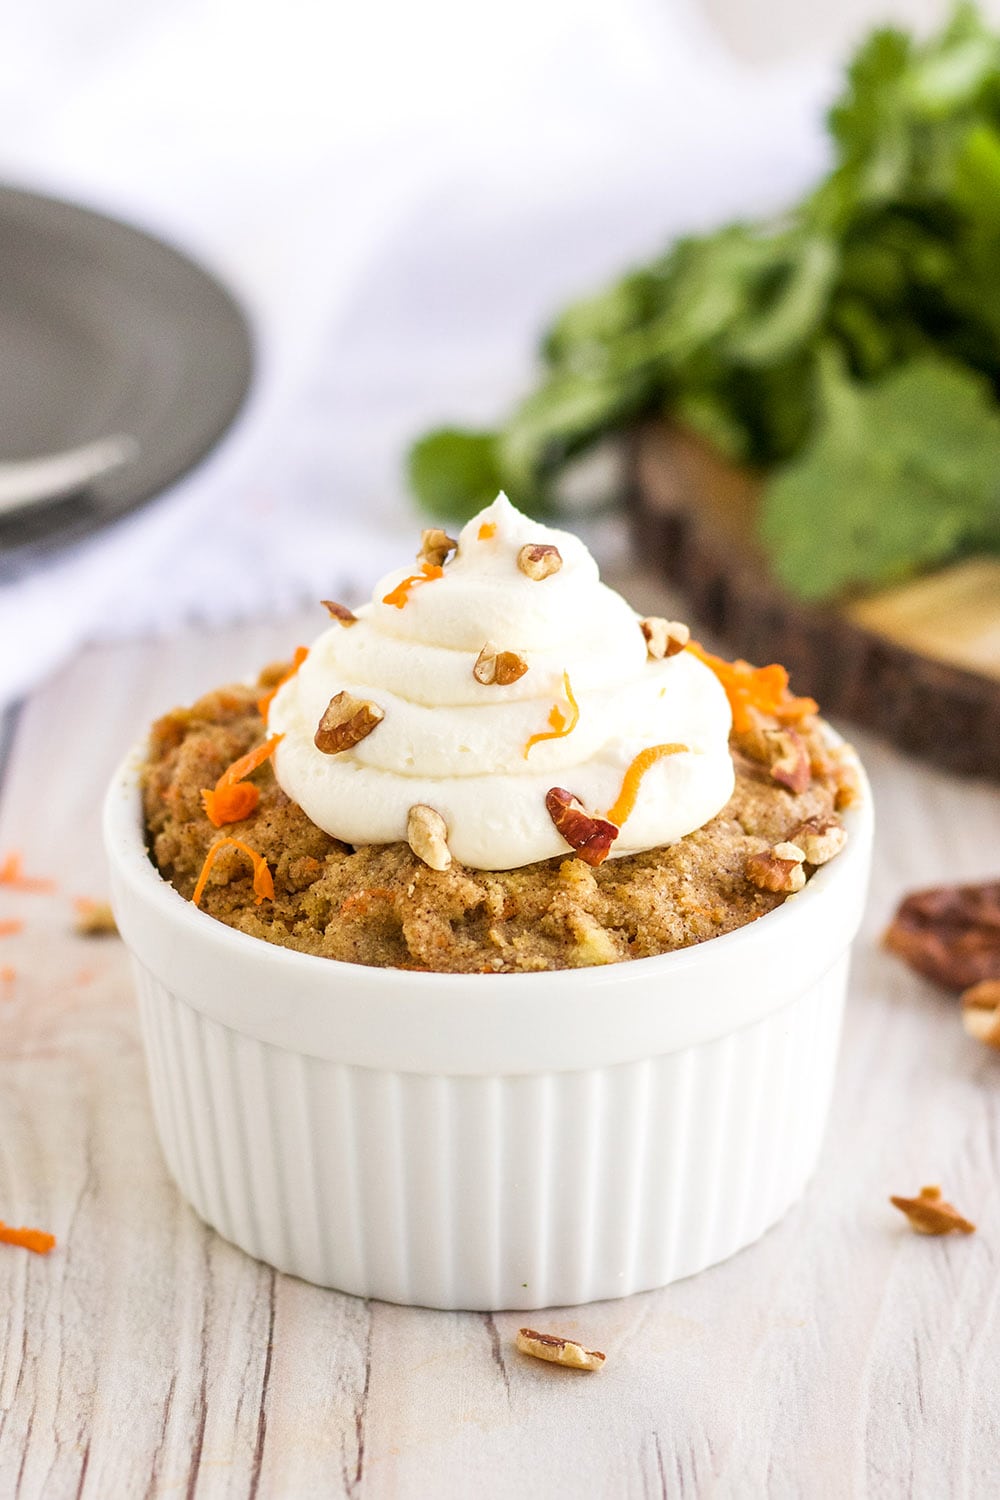 Carrot cake topped with frosting, carrots, and pecans in a mug on a table.